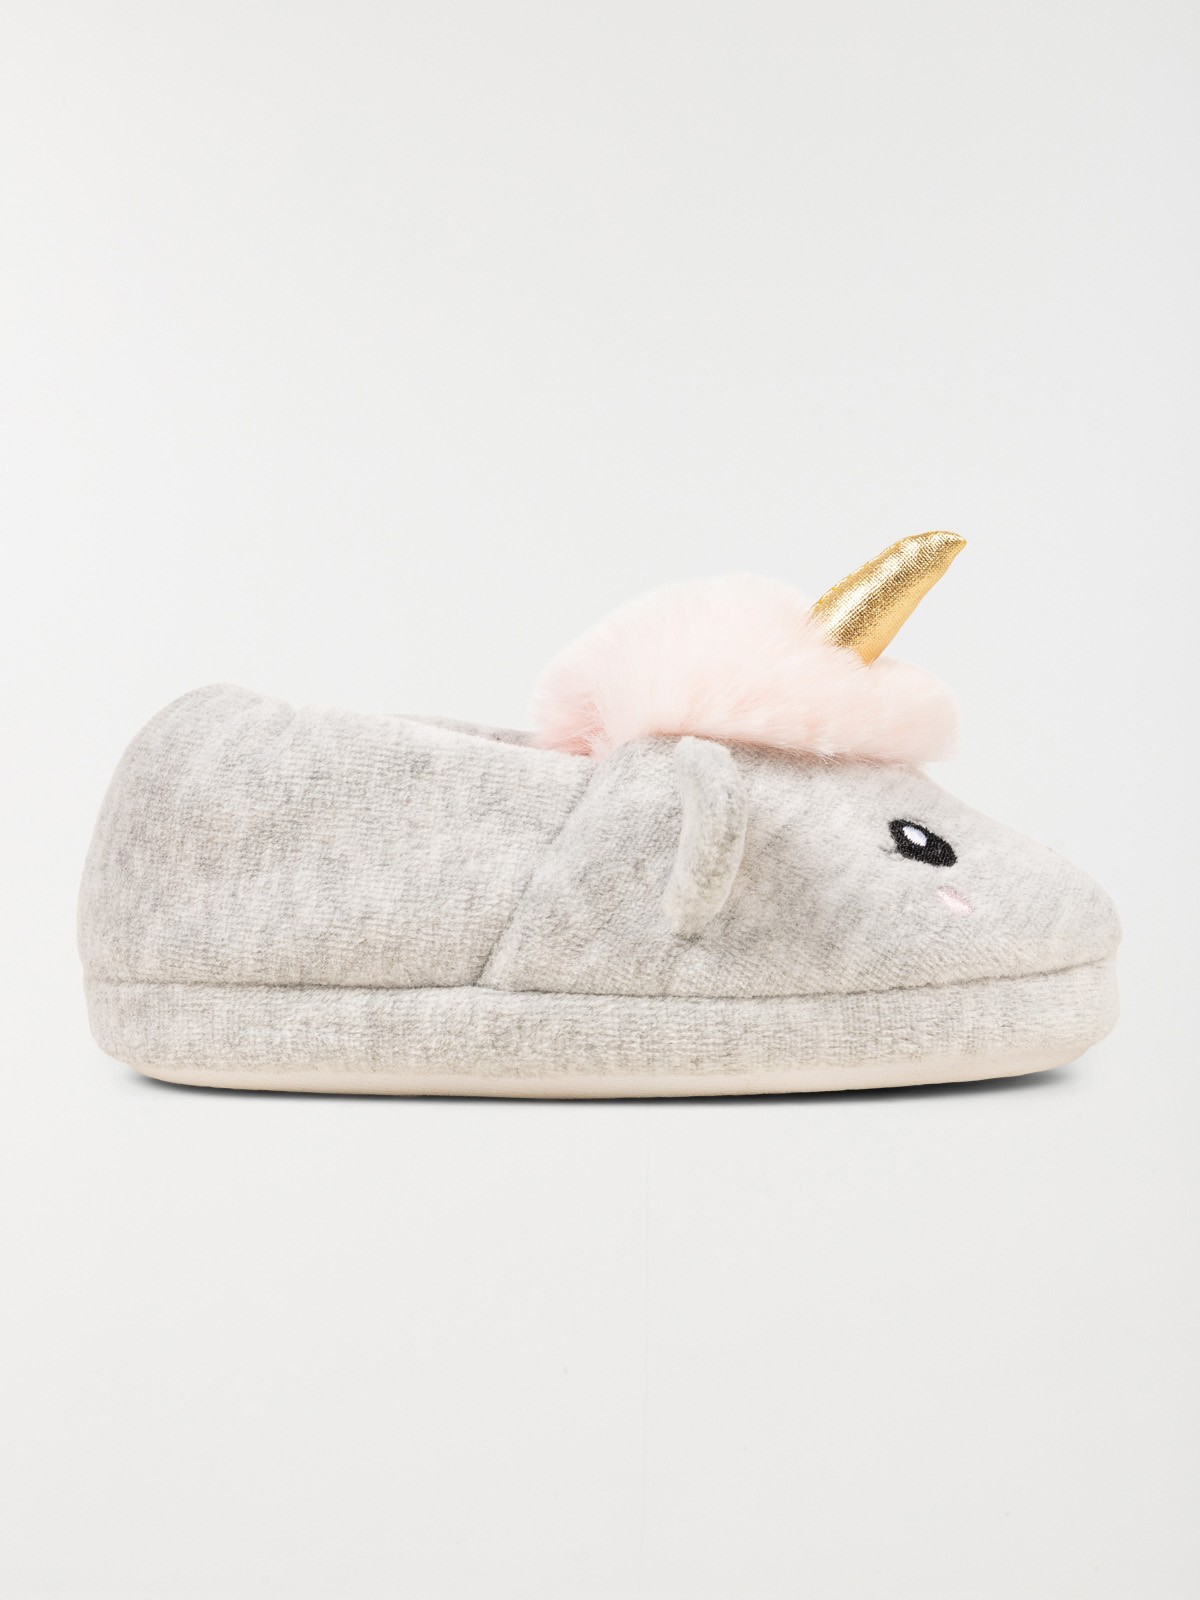 Chaussons gris licorne fille (31-35) - DistriCenter